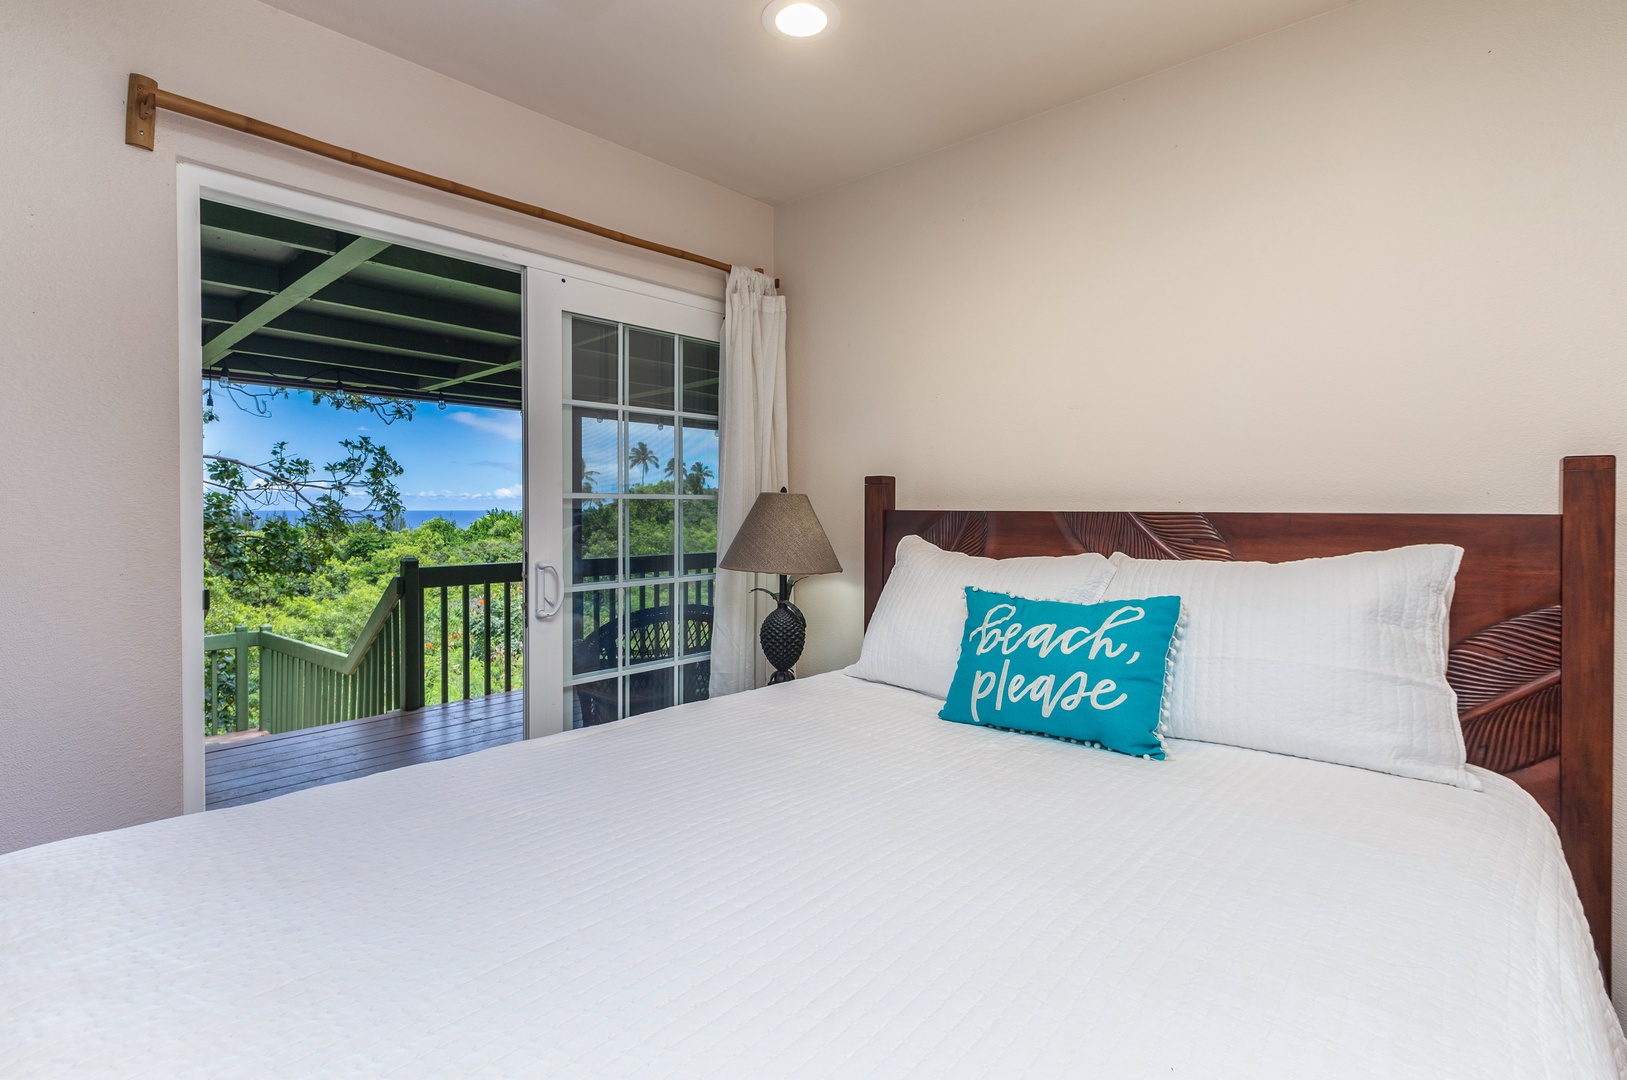 Princeville Vacation Rentals, Hale Ohia - Guest Bedroom 2 also has direct access to the deck and gorgeous ocean views